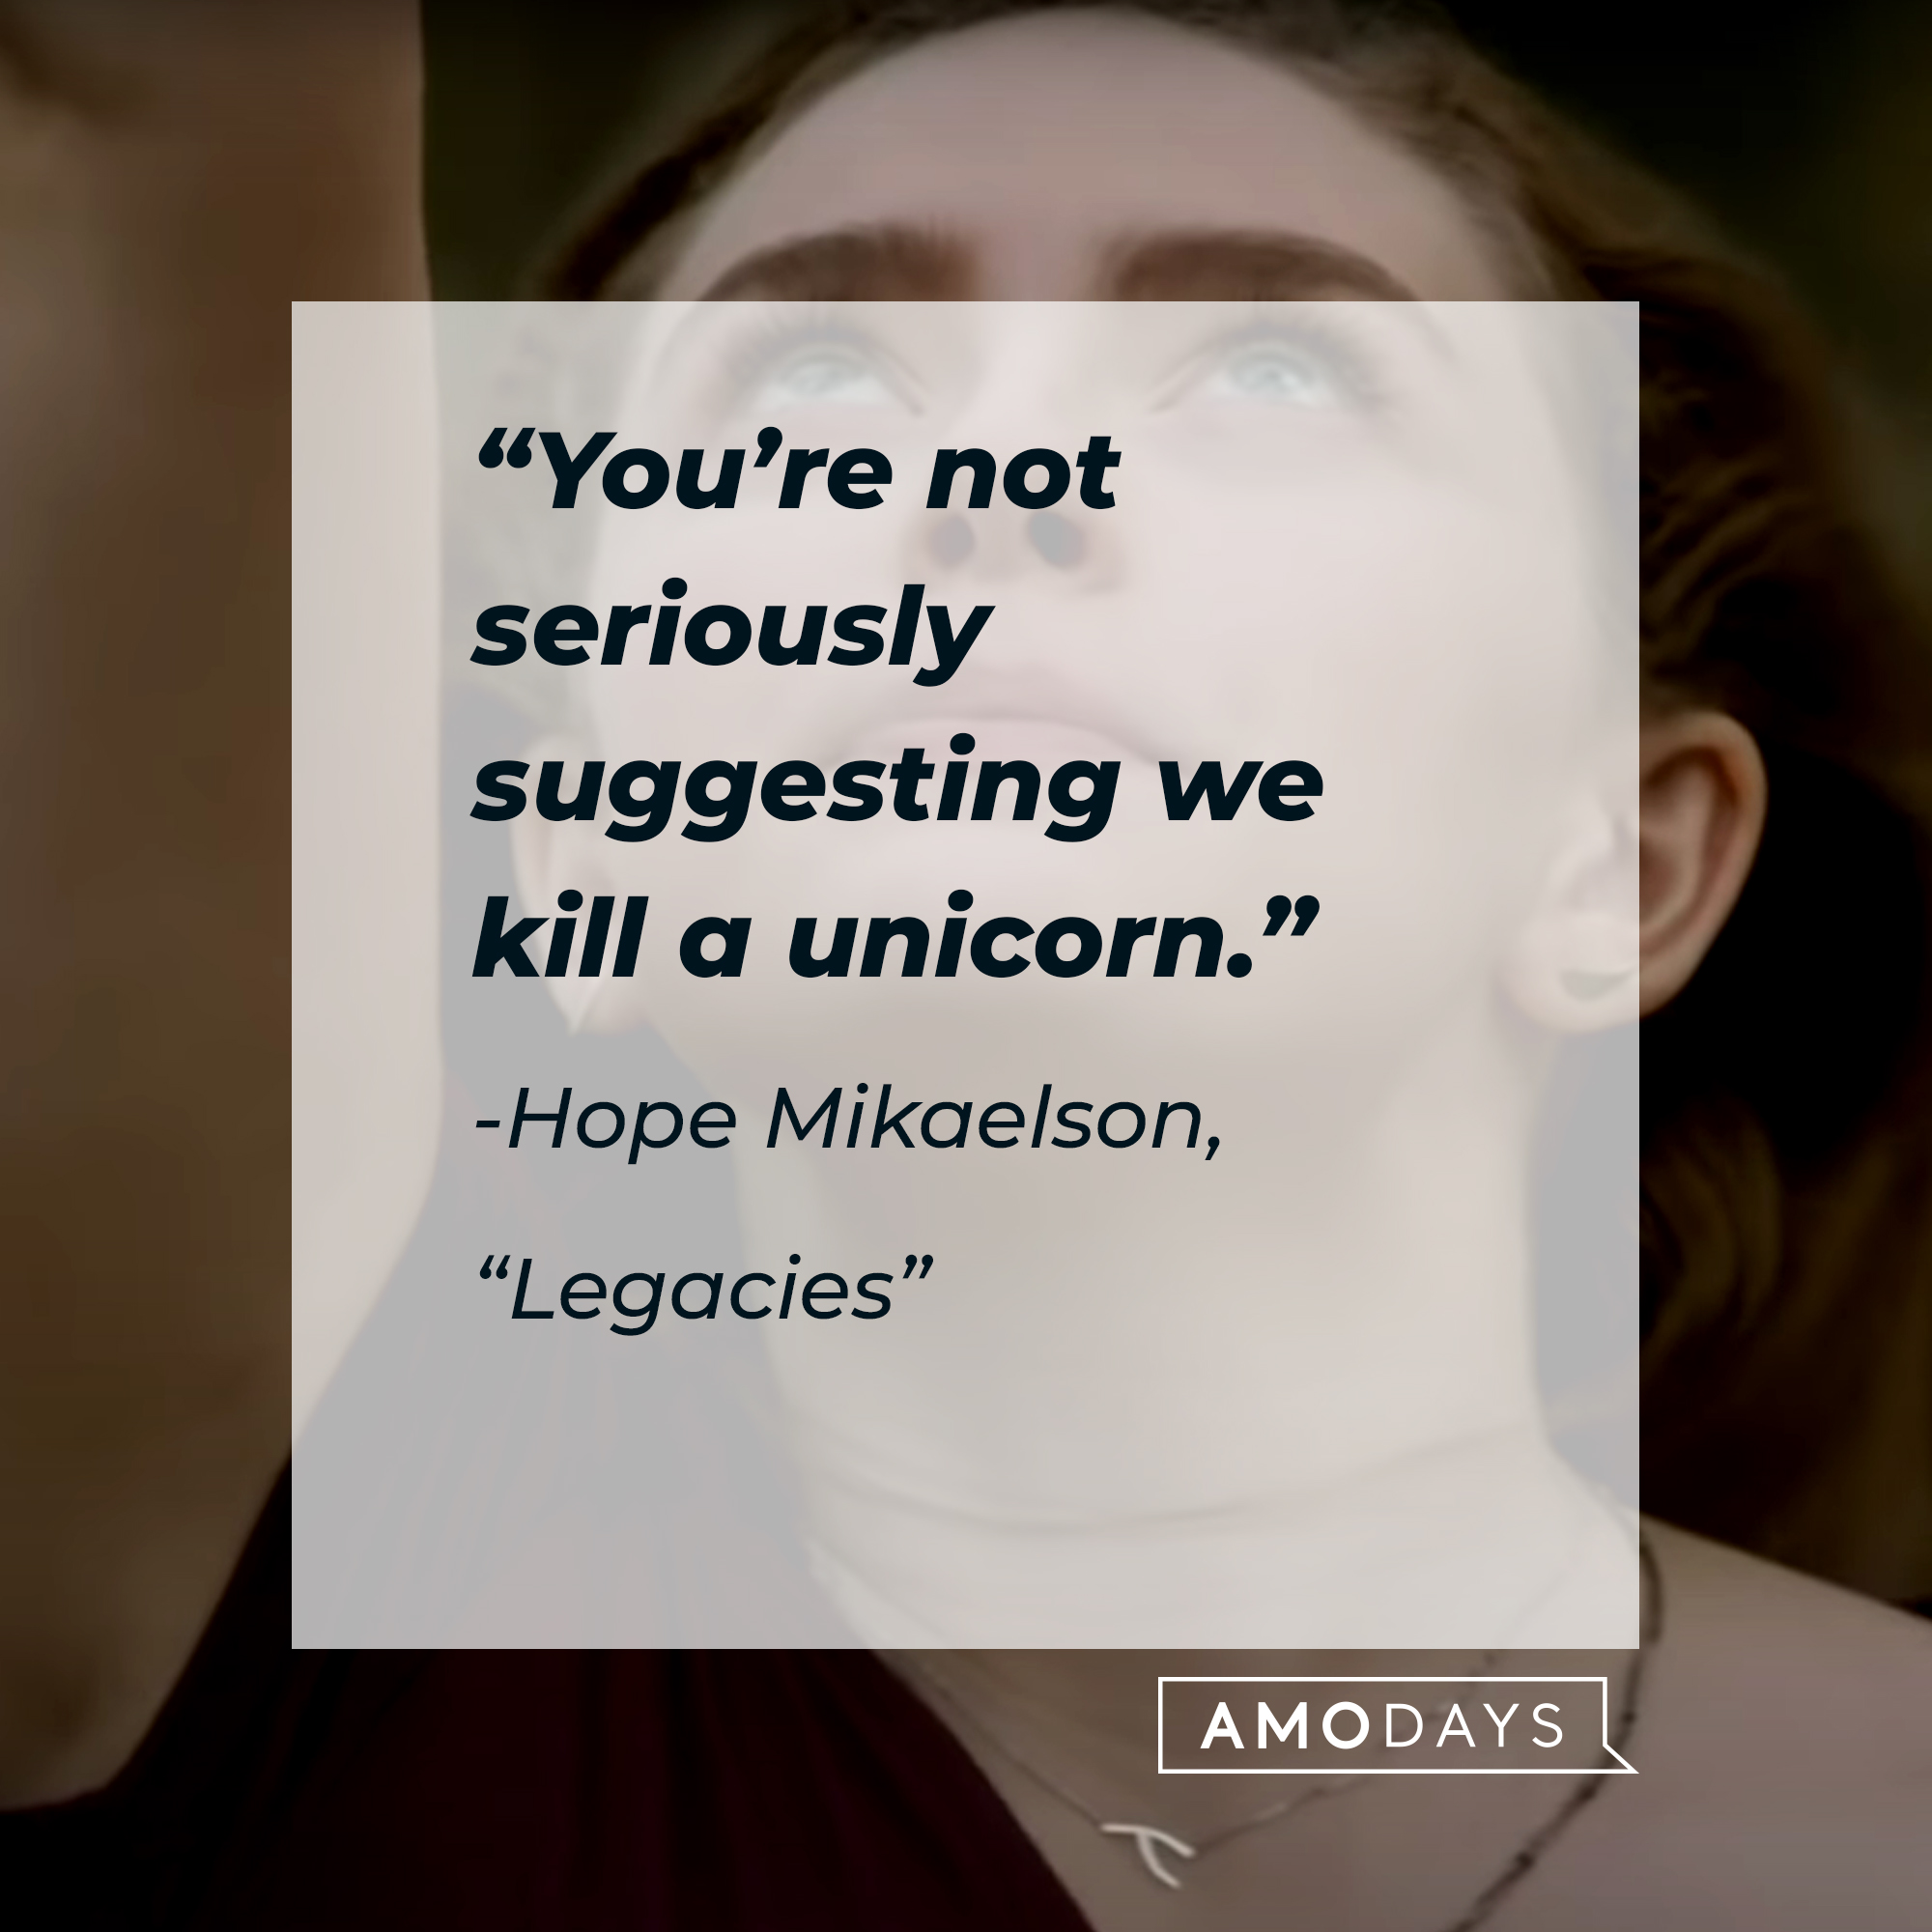 Hope Mikaelson with her quote: “You’re not seriously suggesting we kill a unicorn.” | Source: Facebook.com/CWLegacies